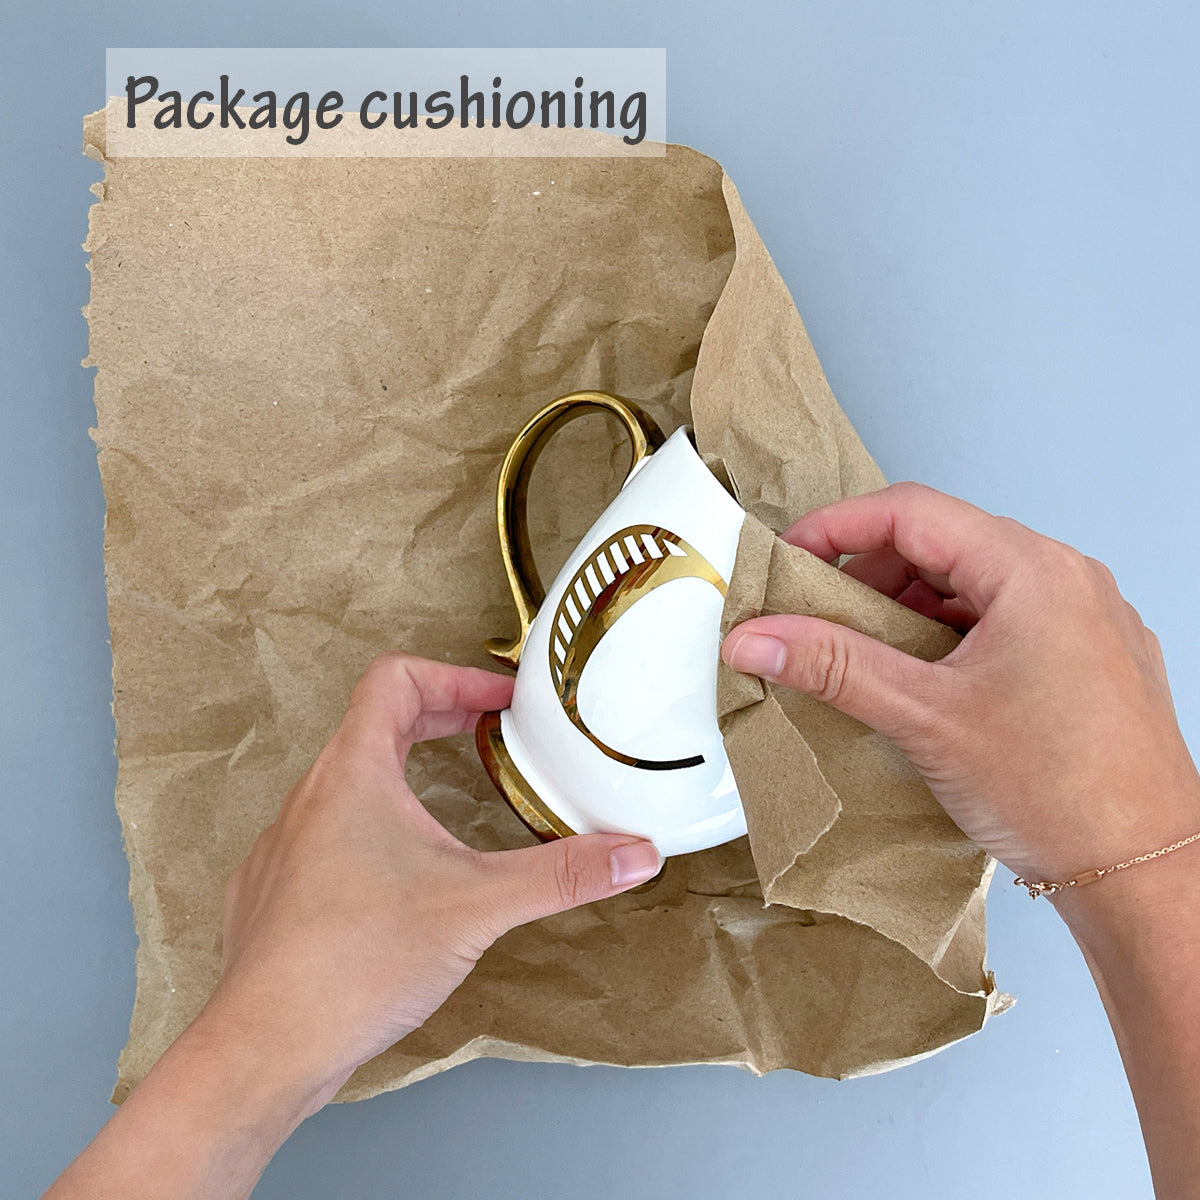  12 * 12 inch Packing Paper for Moving 100 Sheets Protecting  Fragile China and Glasses,Small Wrapping Paper for Shipping and Moving Box  Filler : Office Products